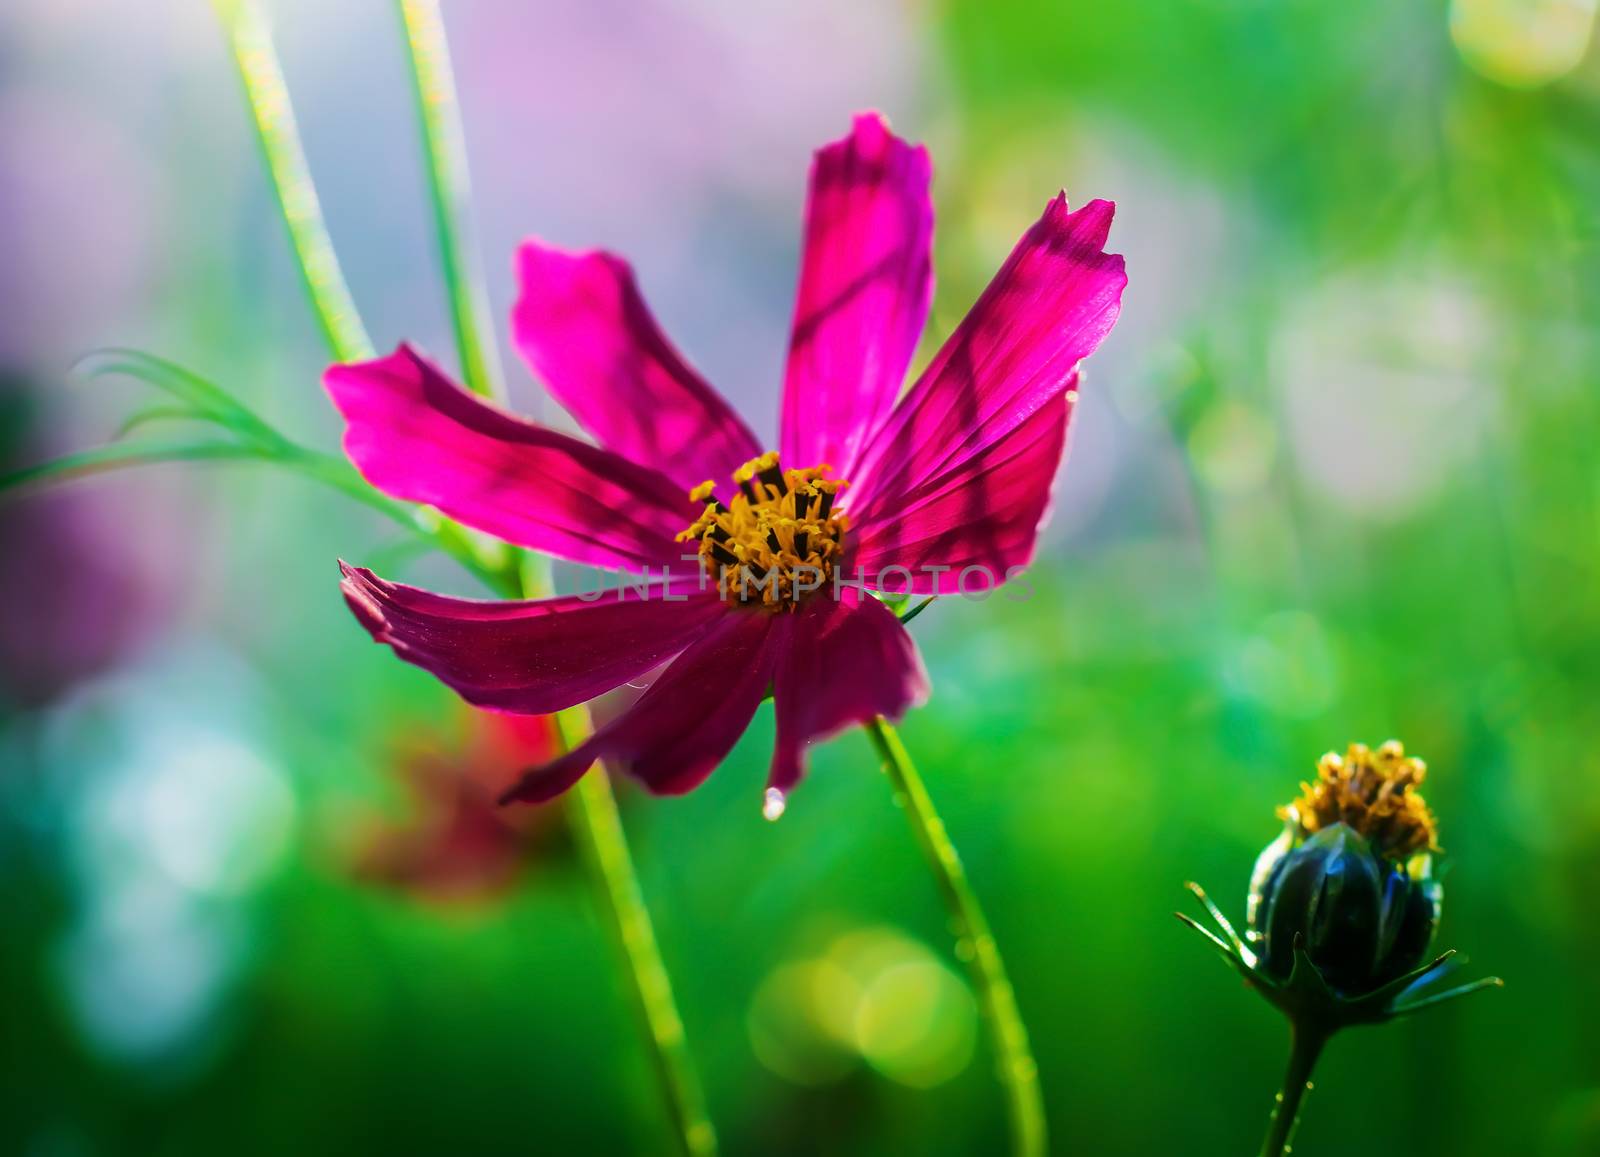 Cosmos flower Cosmos Bipinnatus with blurred background.